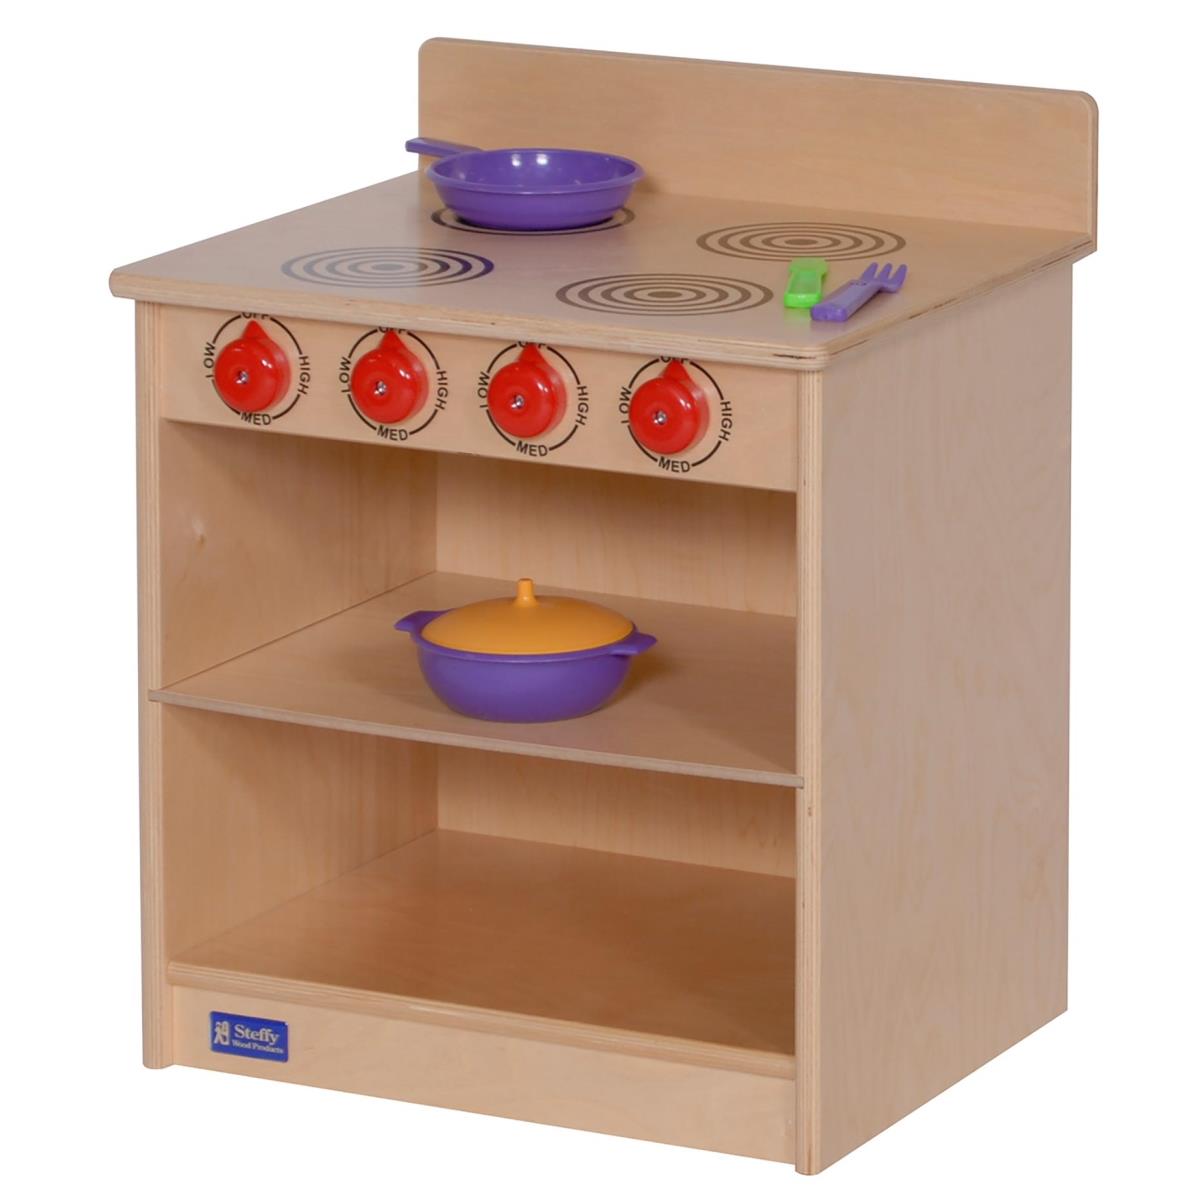 Angeles Ang1172 Toddler Brich Stove - Uv Finish - 15 X 18 X 21 In.